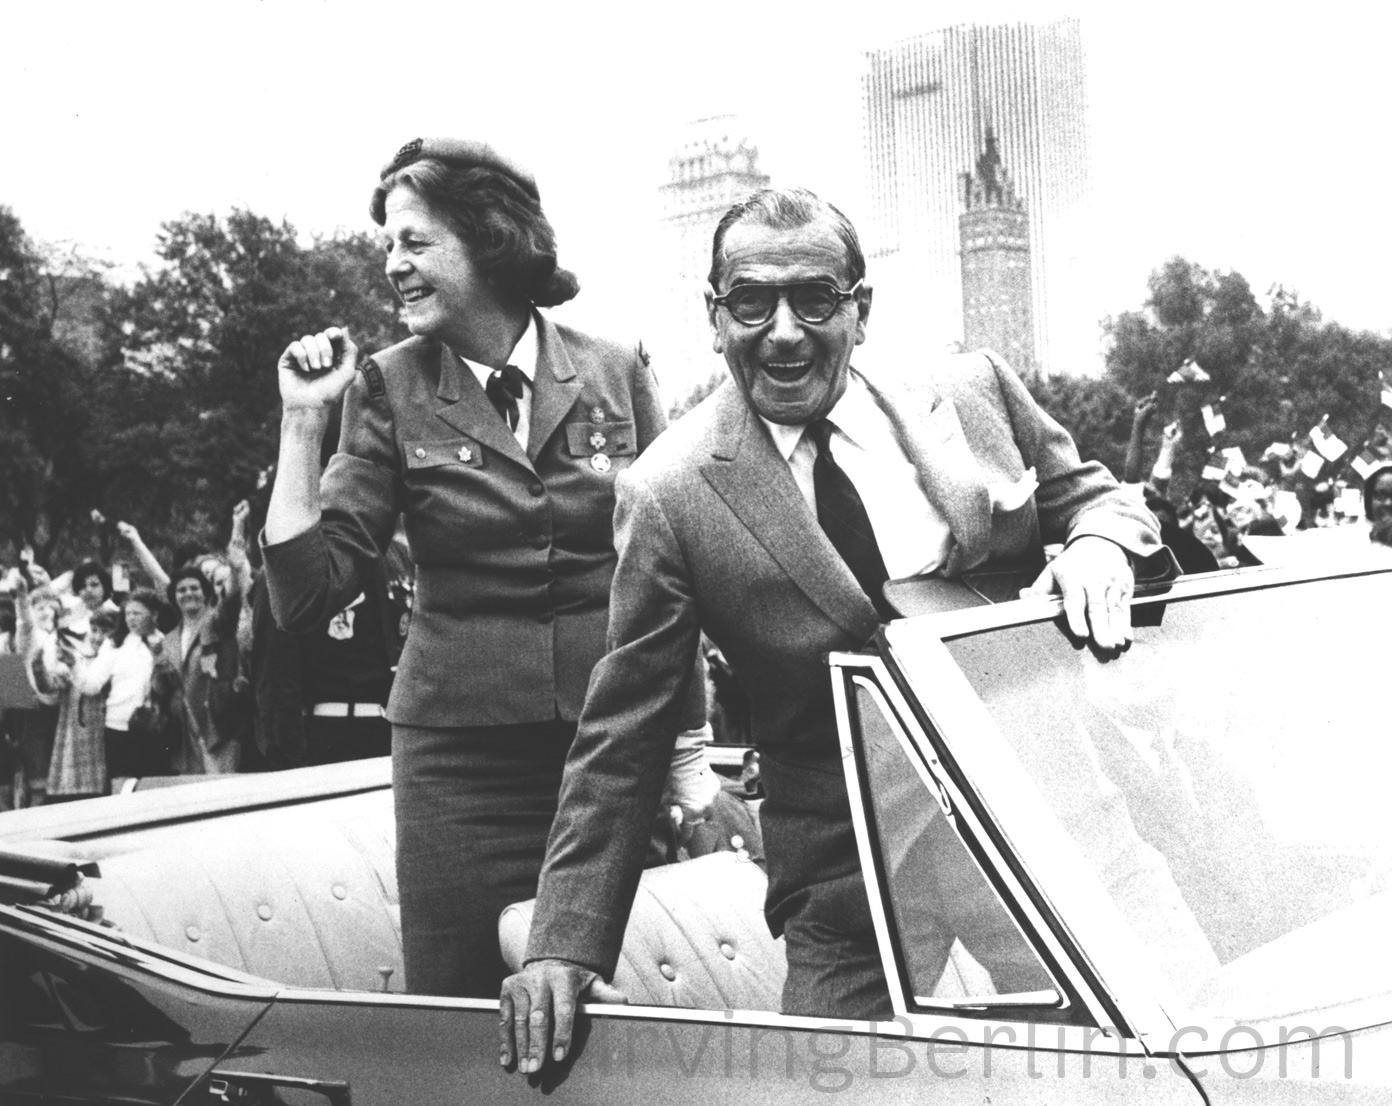  Irving and Ellin Berlin at a Boy Scout's Parade 